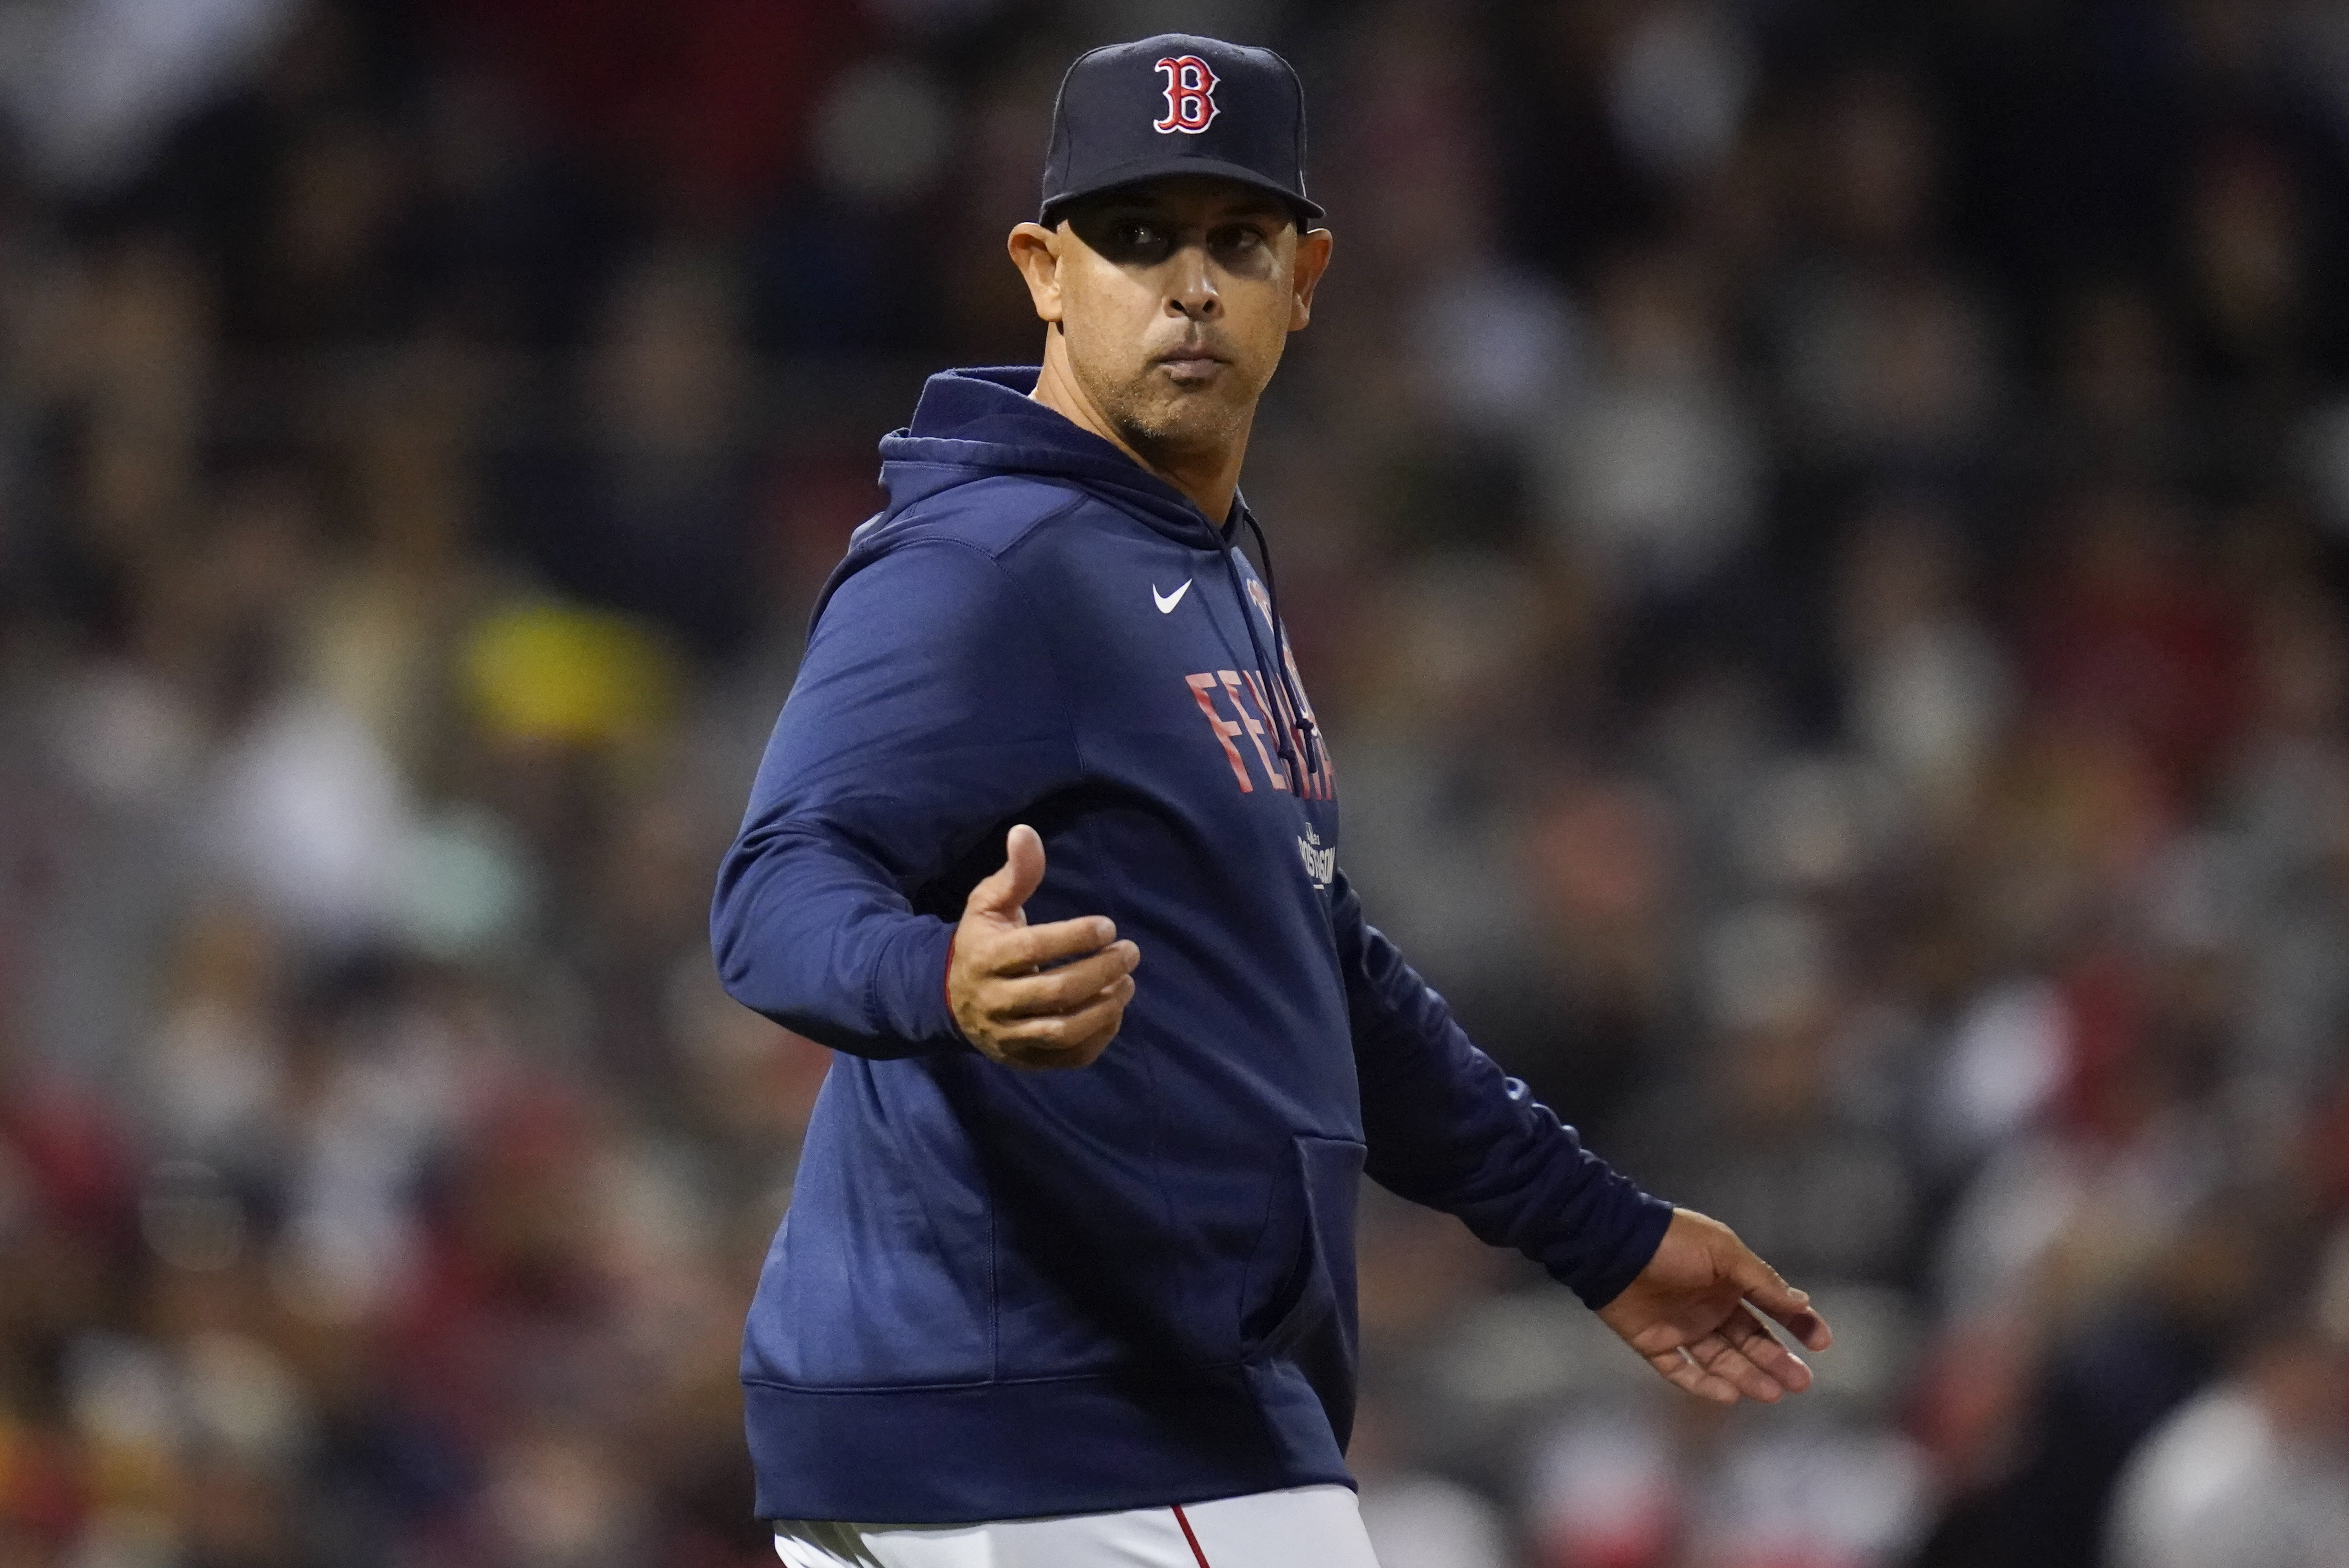 MLB's new uniform rules won't prevent Red Sox from keeping Boston